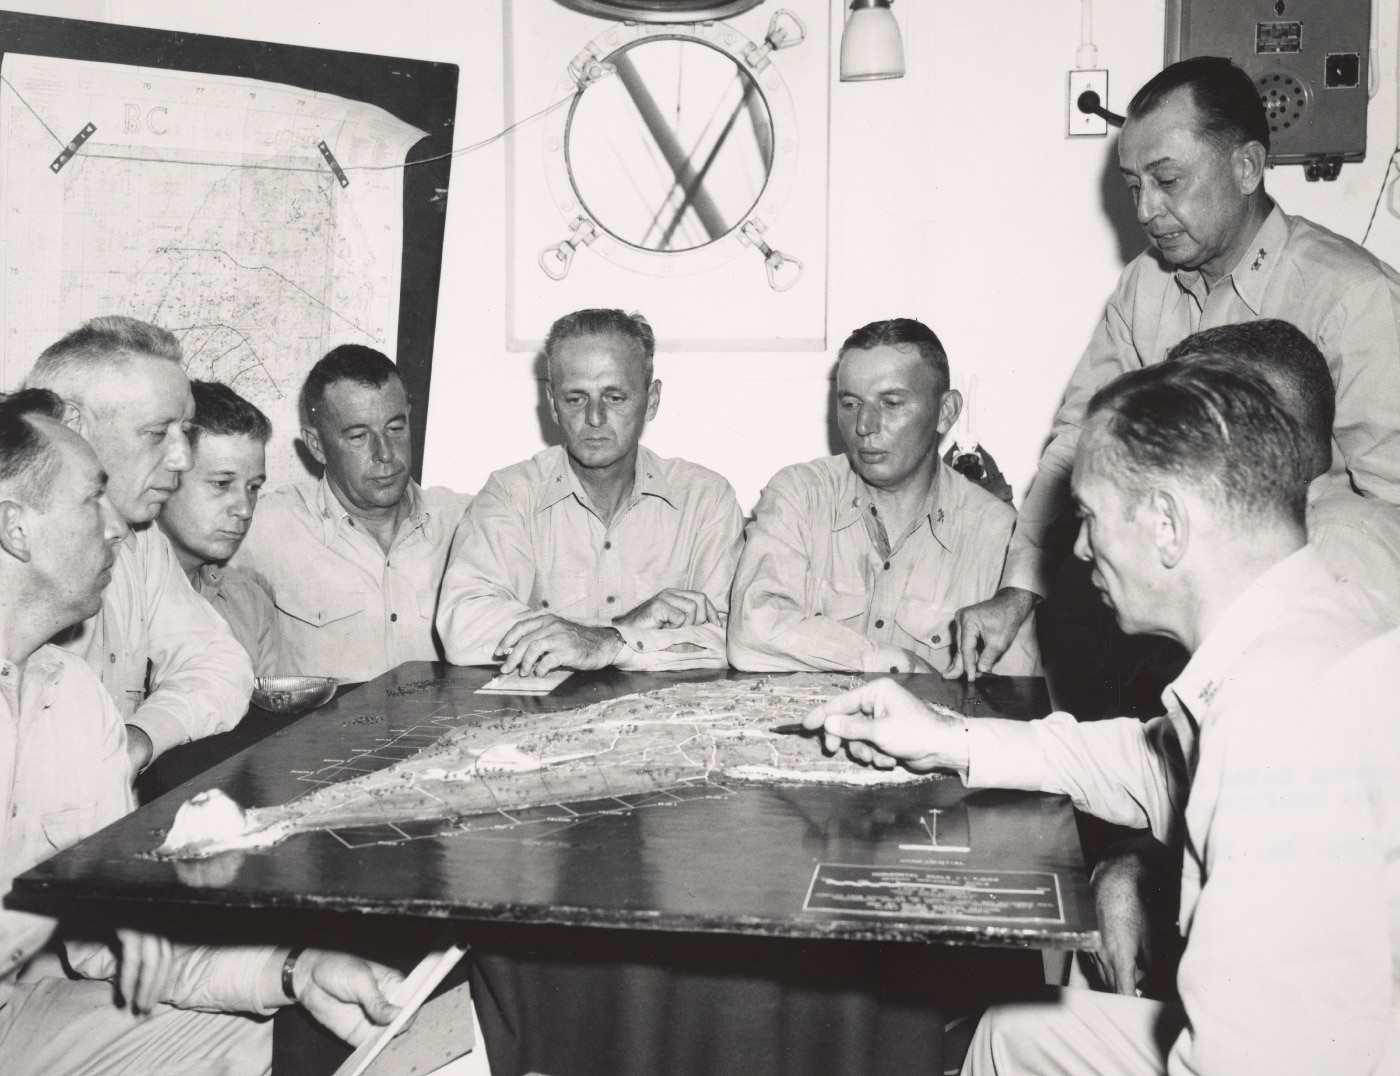 In this photo we see a collection of Marine officers going over the invasion plan of the capture of Iwo Jima ahead of D-Day. Once the battle started, the seizure of Iwo Jima was certain due to good planning and the dedication of the men sent to carry out the invasion plan. Letters from Iwo Jima told tales painted a grim picture of commonplace valor and heroism. 